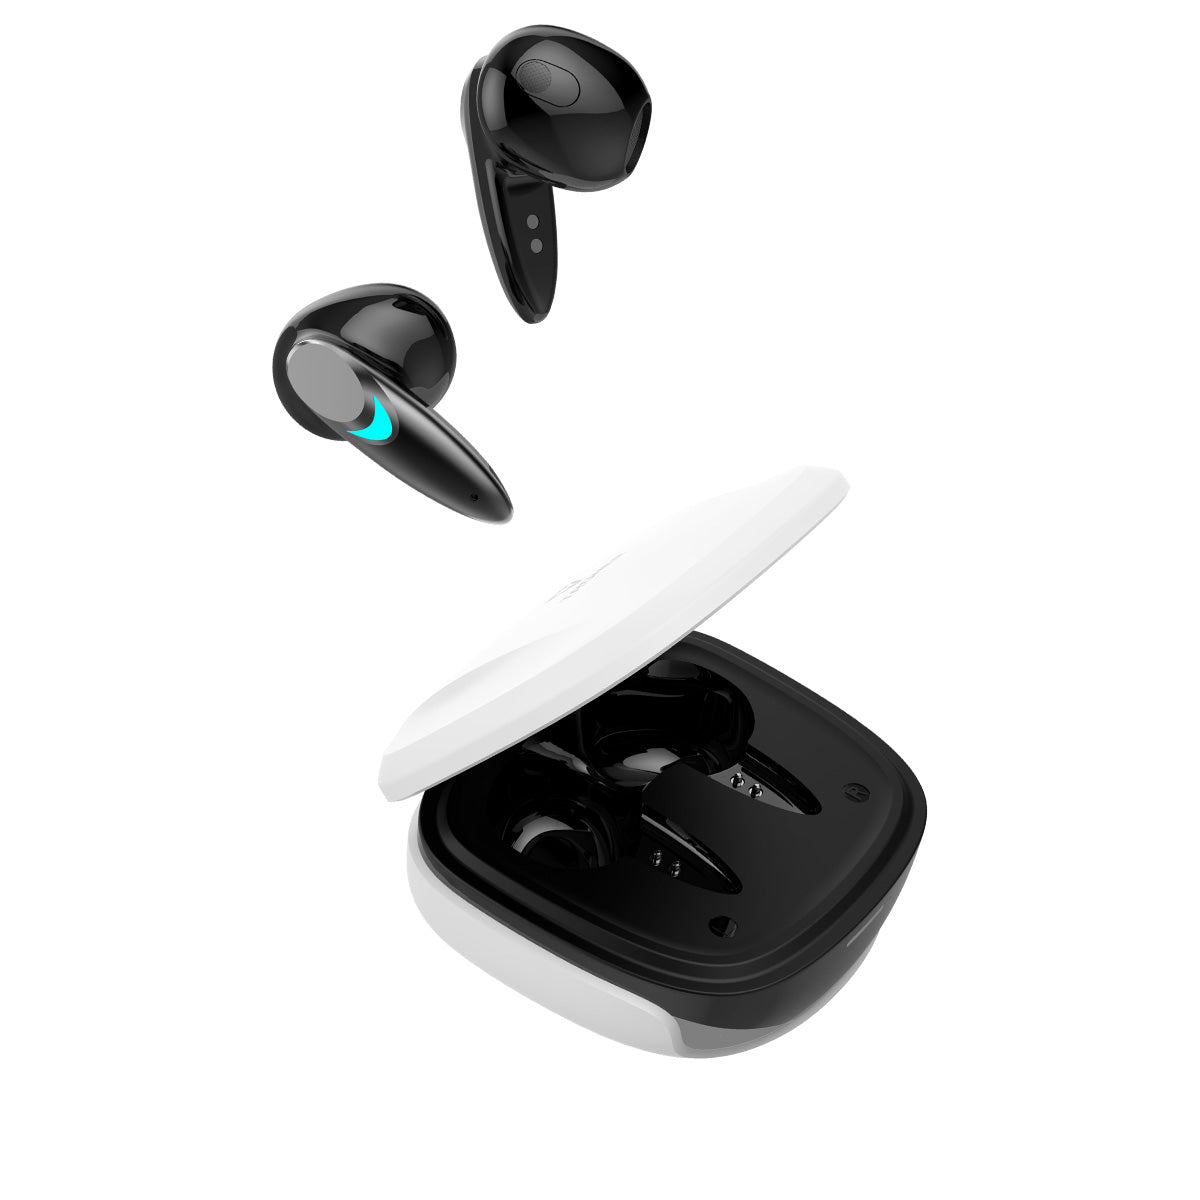 Faster TG300 Low Latency Gaming Earbuds Price in Pakistan